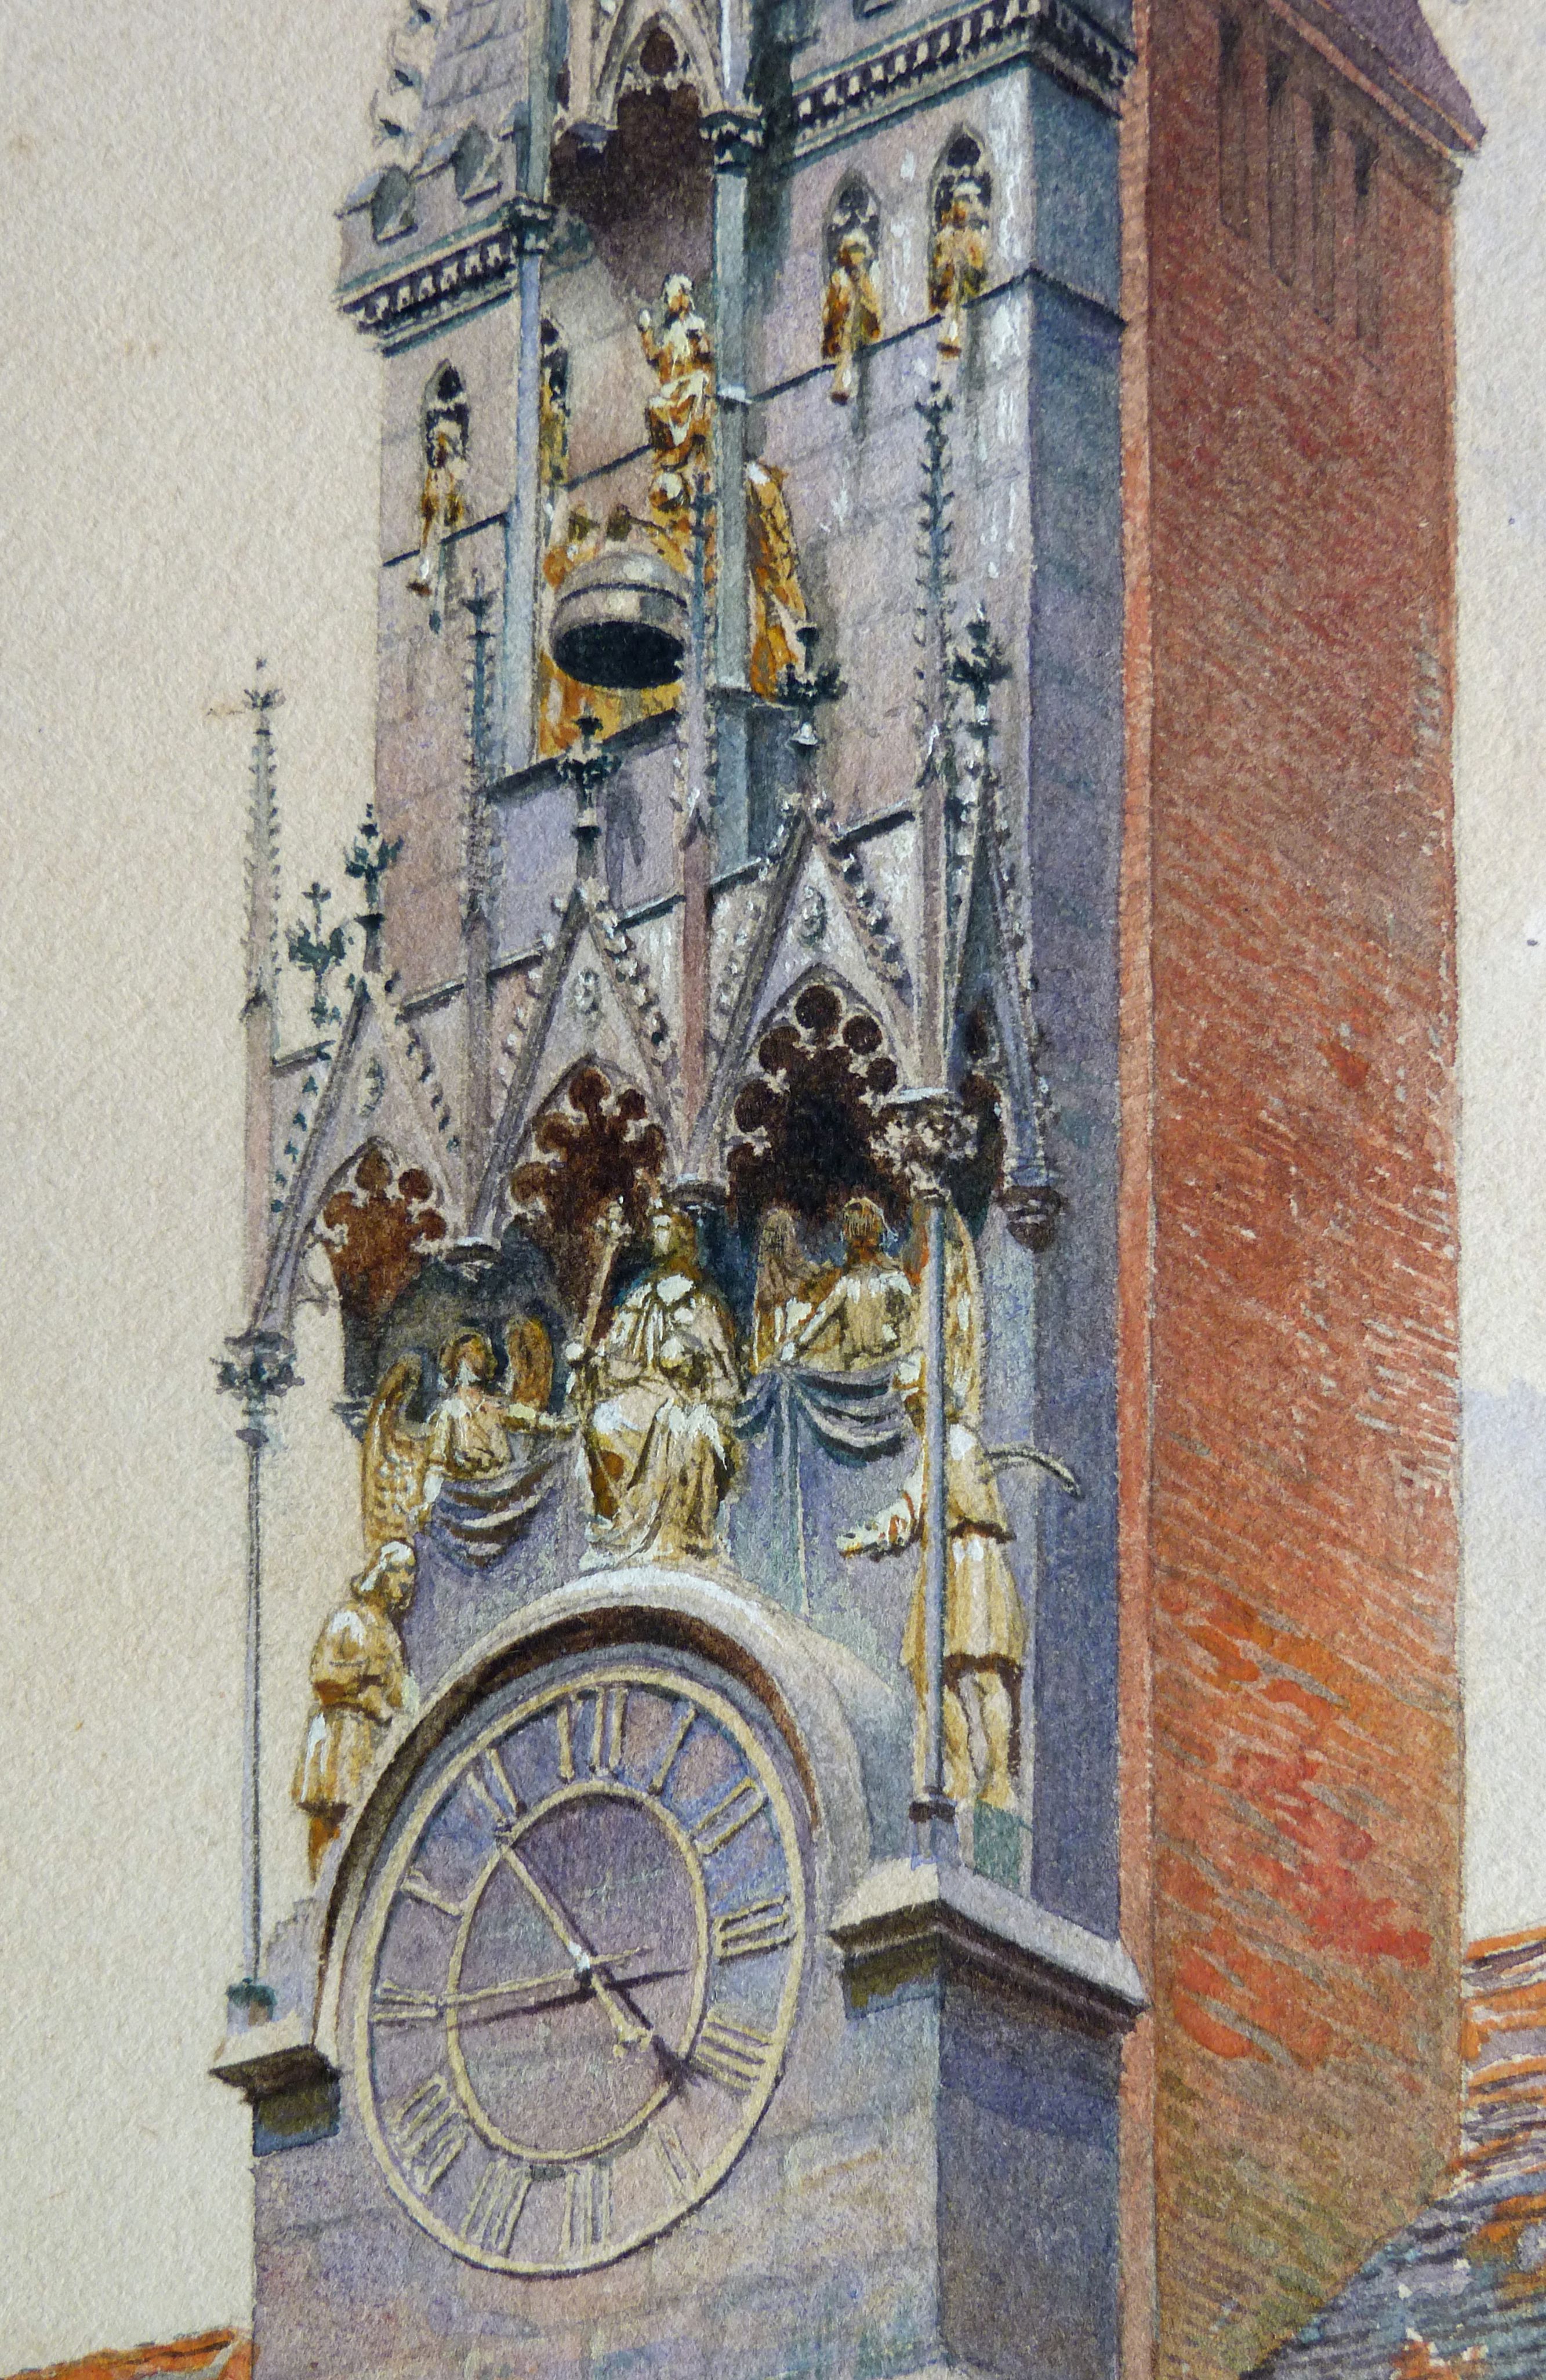 German National Museum, Augustine wing, so-called Wittelsbach Court with Wittelsbach clock Wittelsbach clock